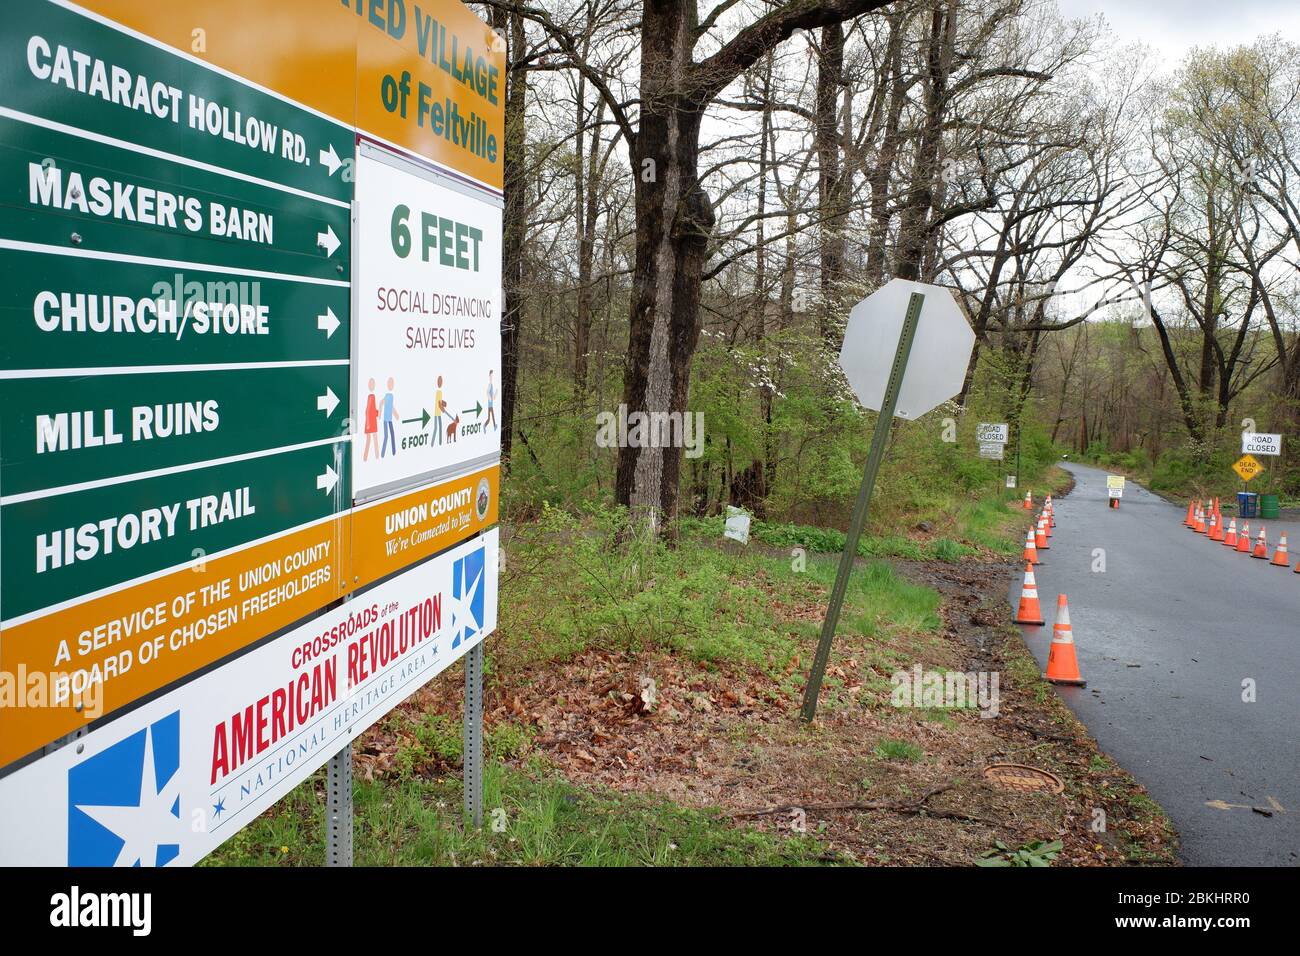 Warning sign of keep social distance at 6 feet placed on the direction sign of the Deserted Village of Feltville.Watchung Reservation, Berkeley Heights.New Jersey.USA Stock Photo